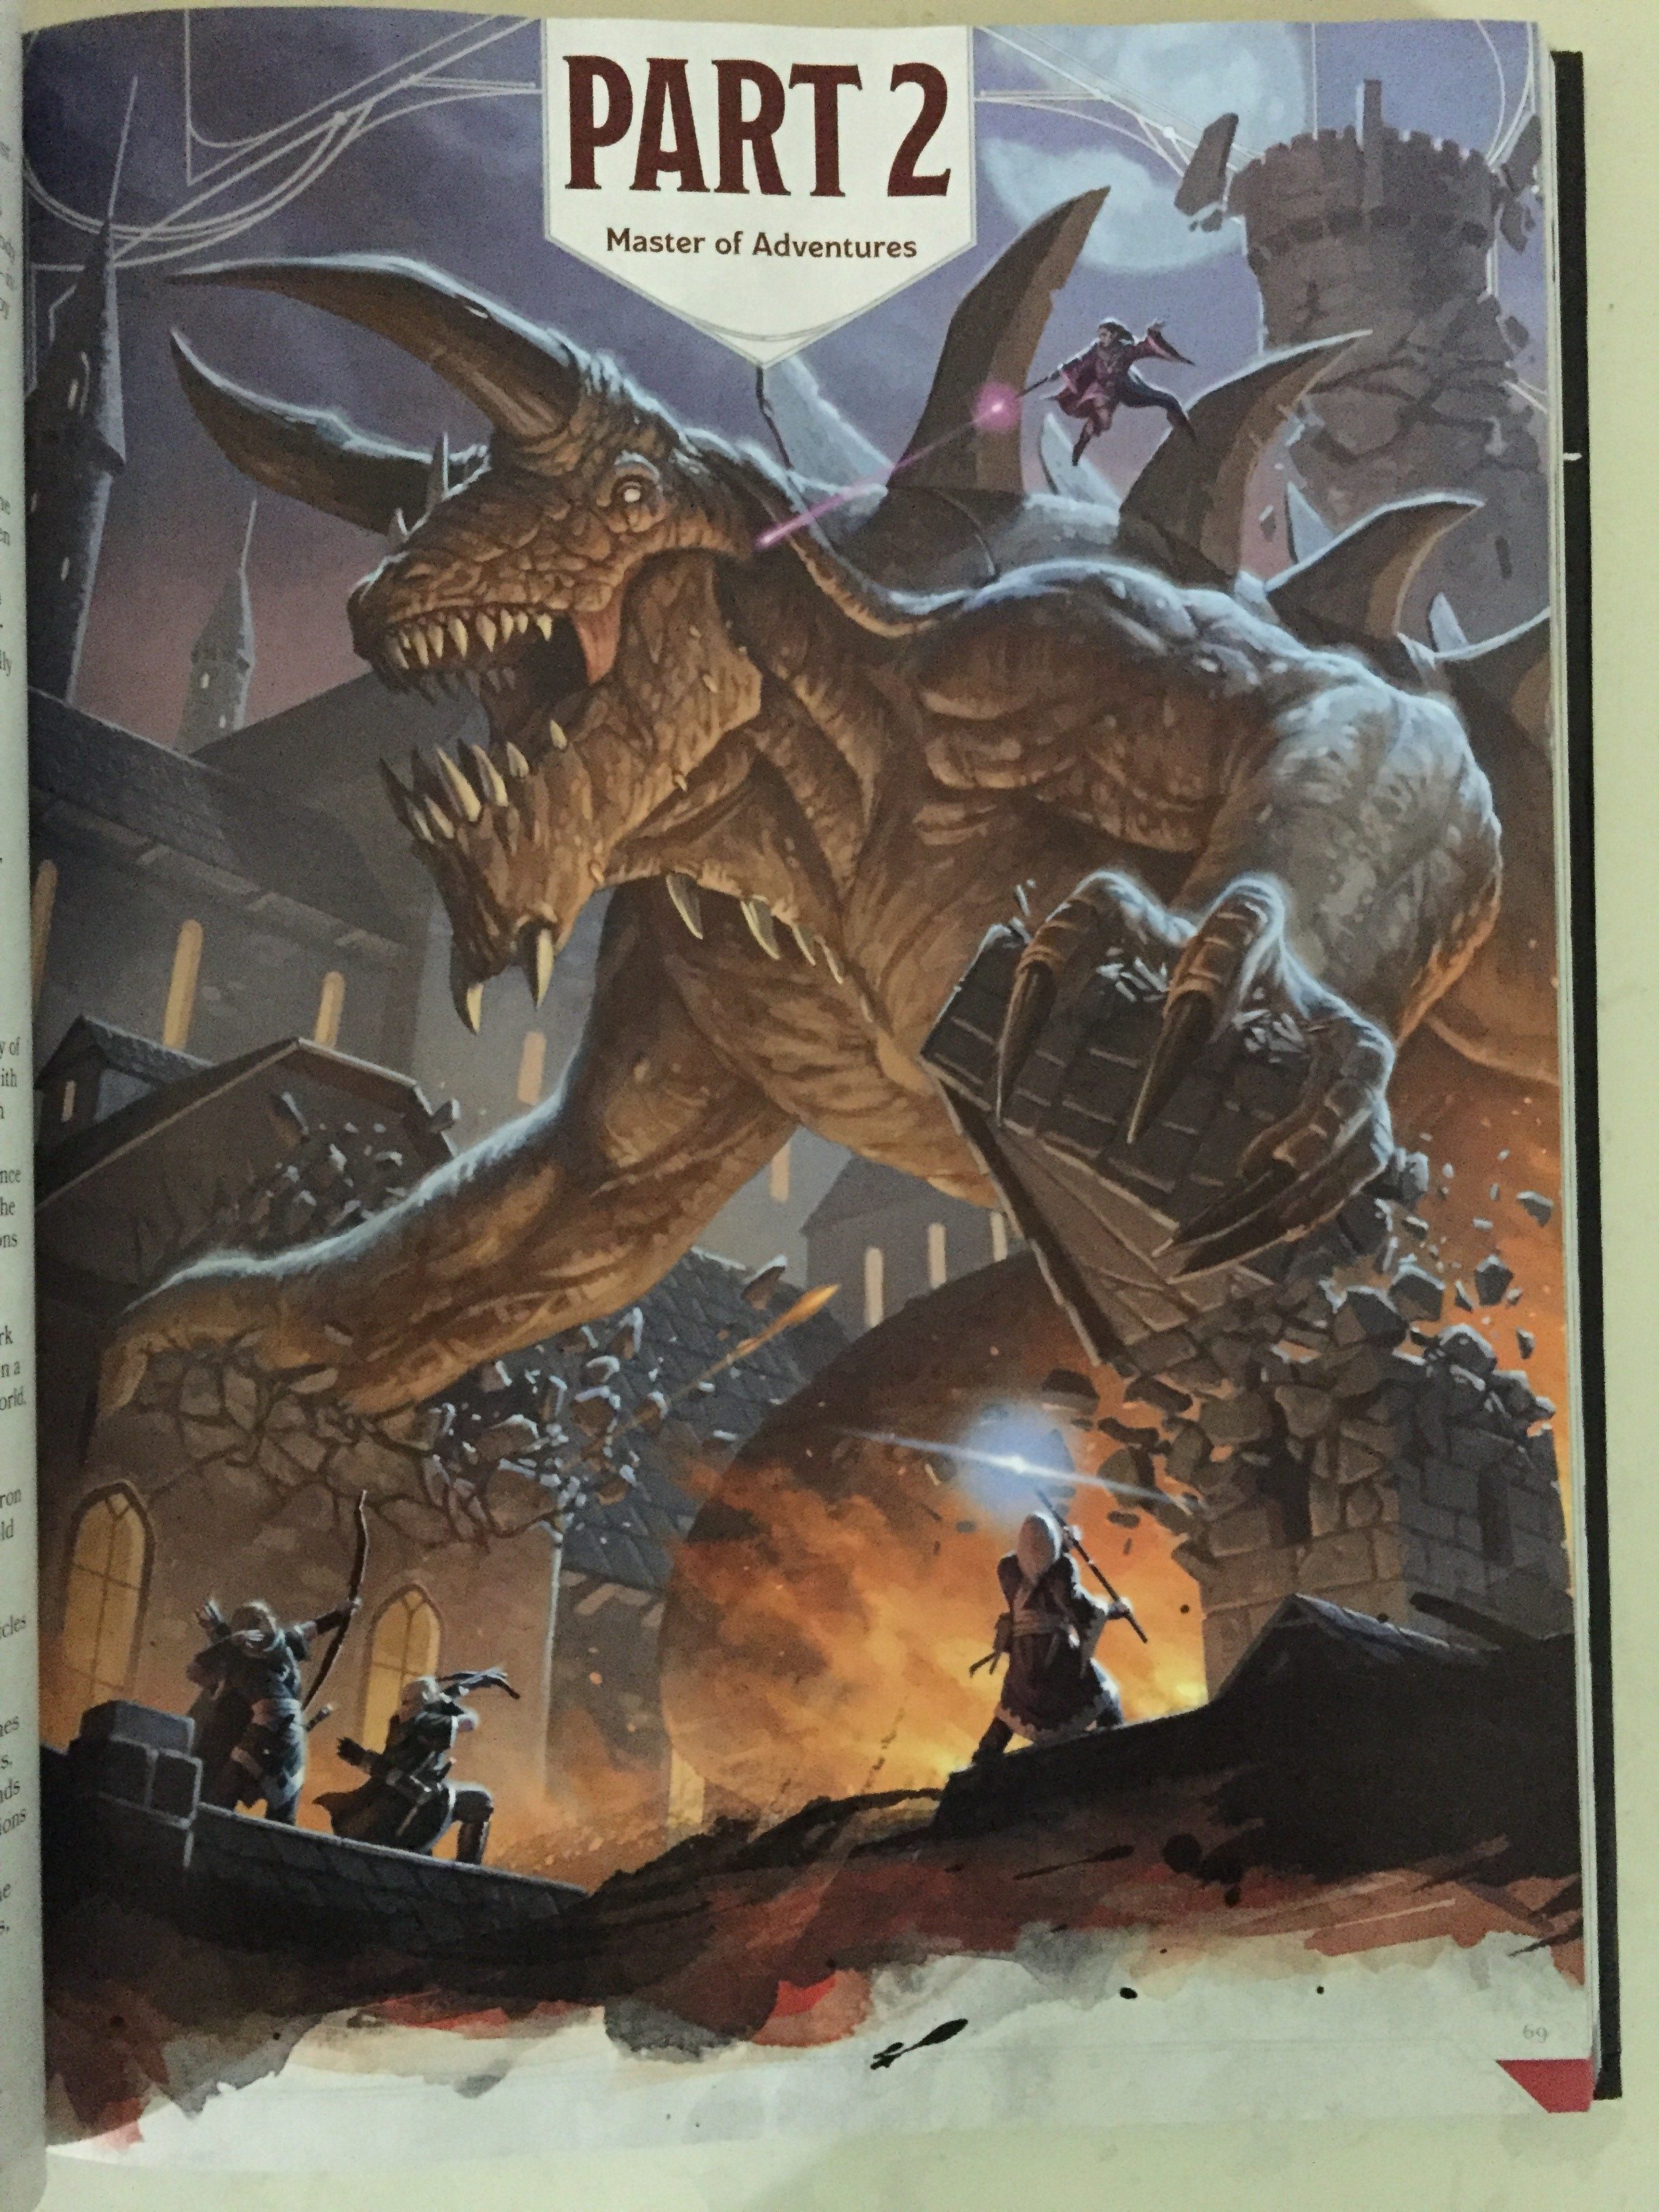 Tarrasque. (Dungeon Master's Guide for Dungeons & Dragons 5th Edition)